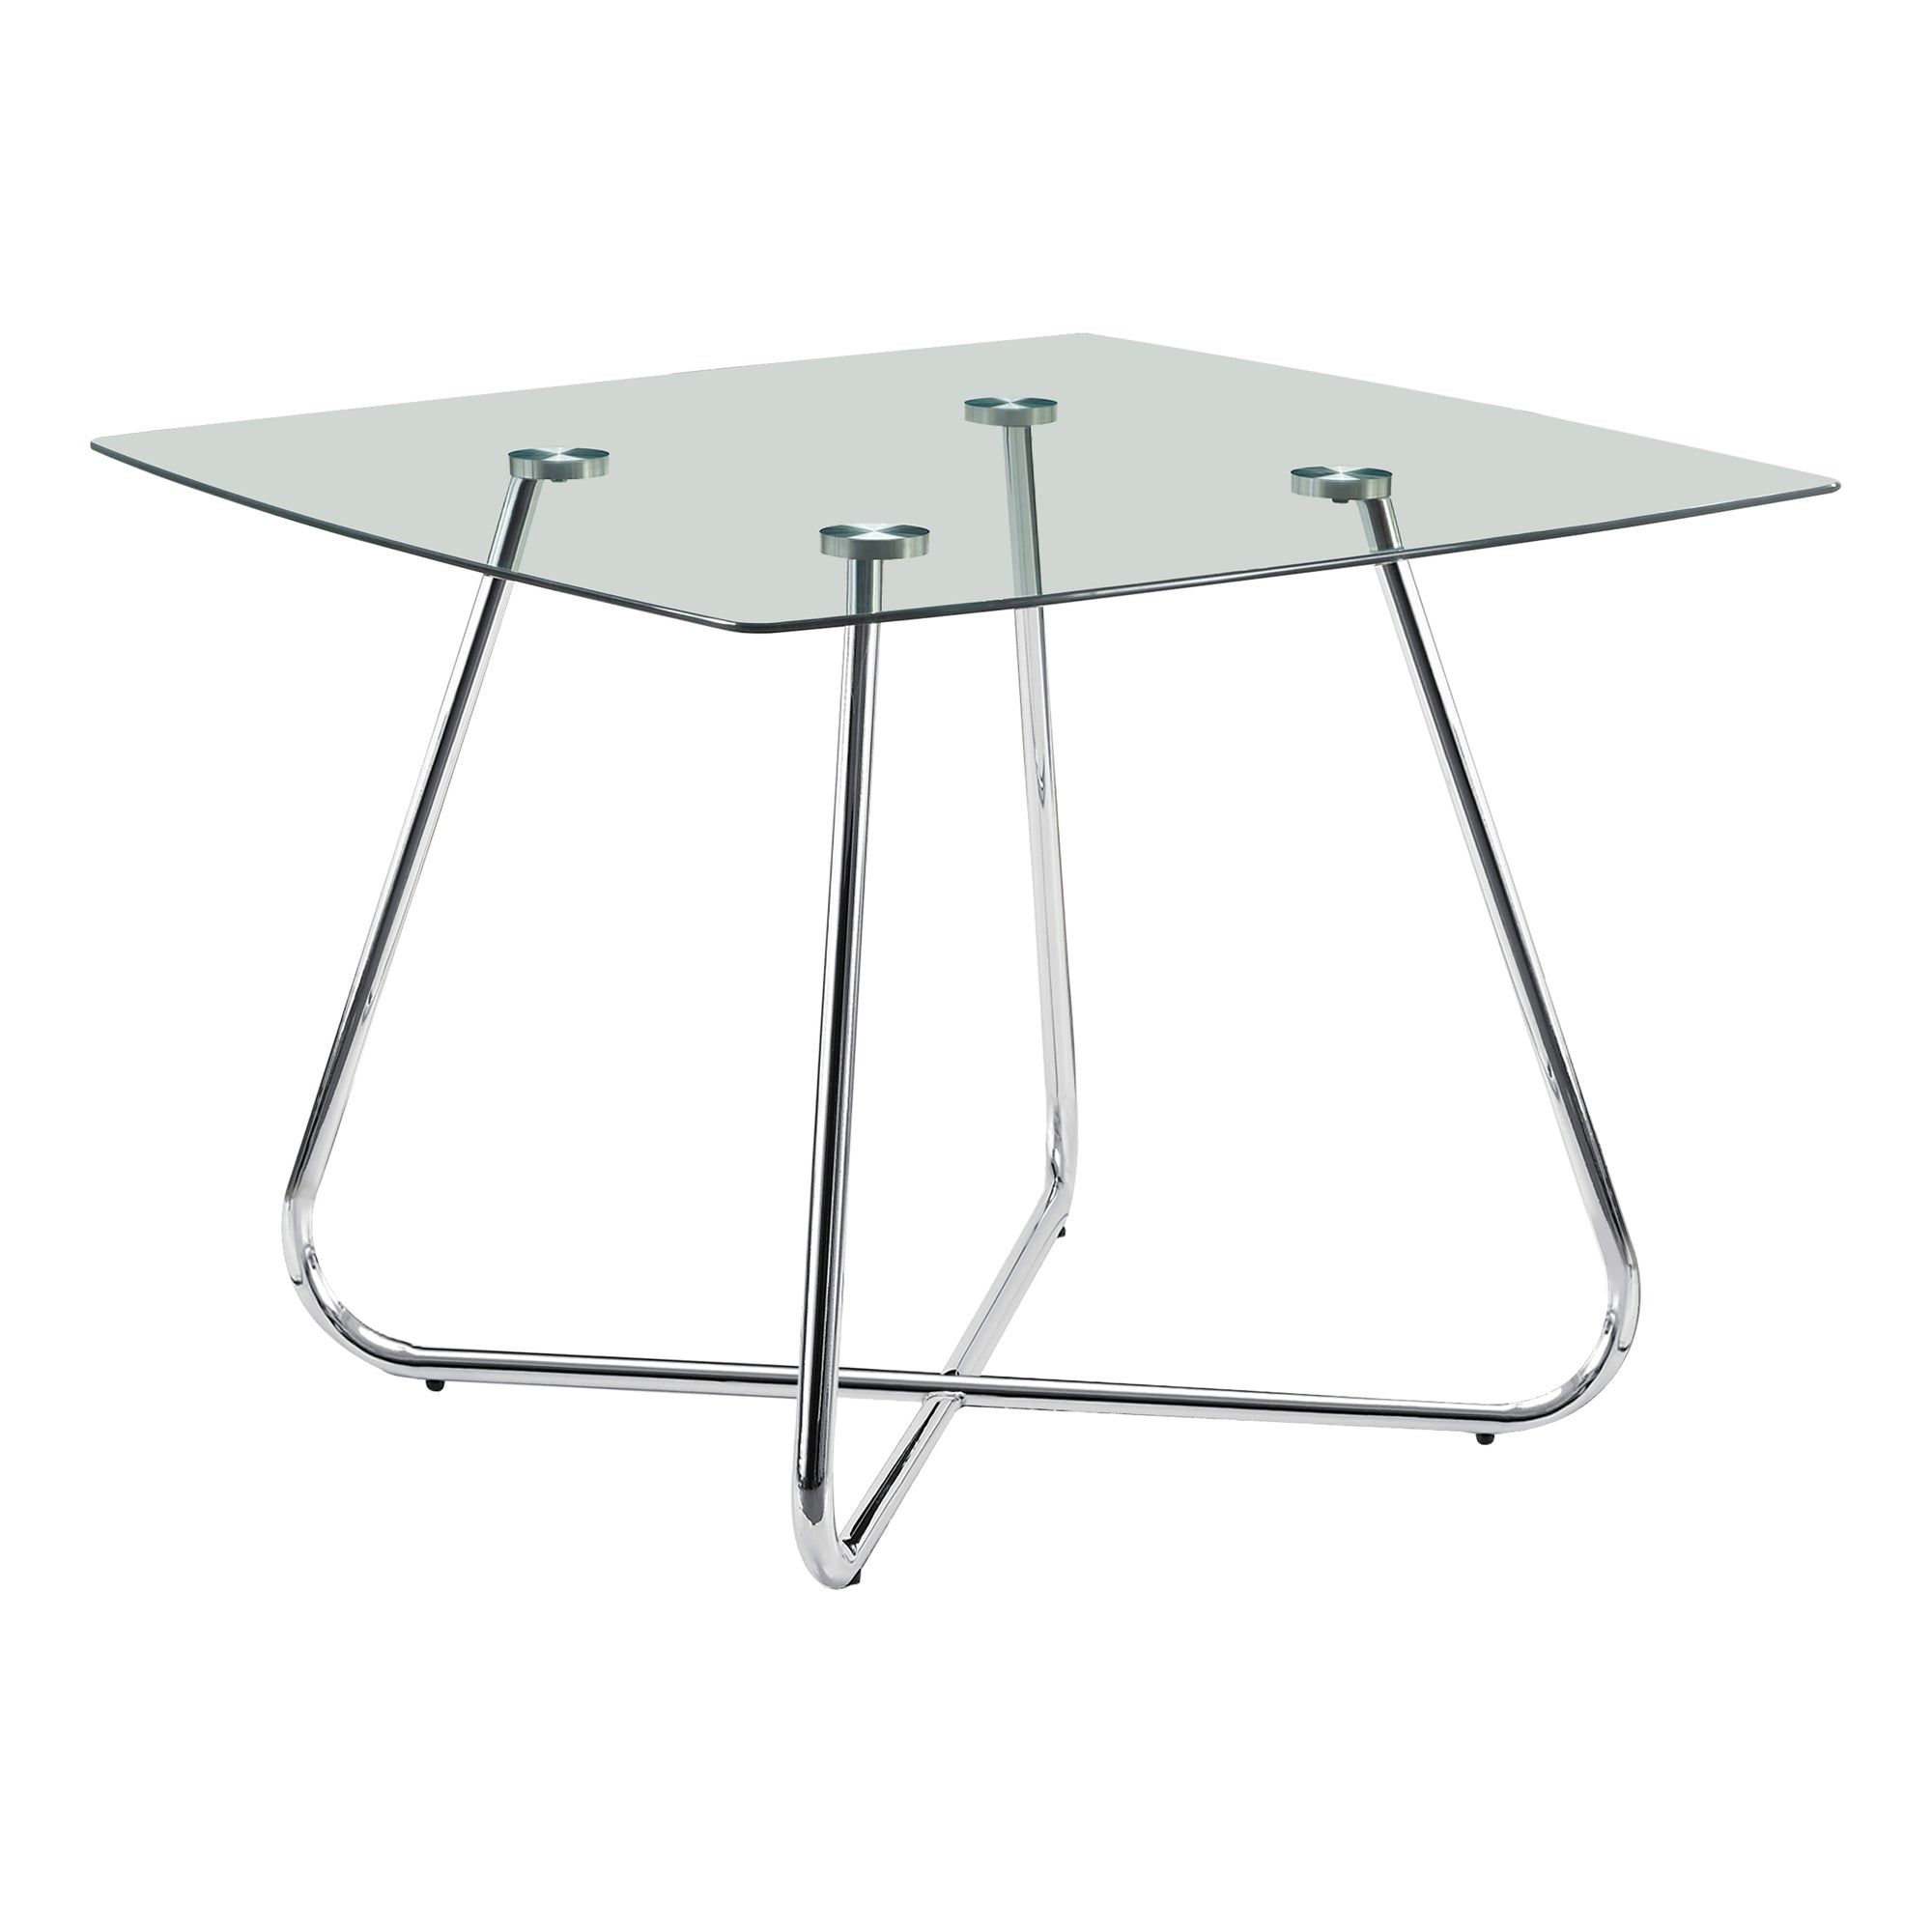 DINING TABLE - 40"DIA CHROME WITH 8MM TEMPERED GLASS